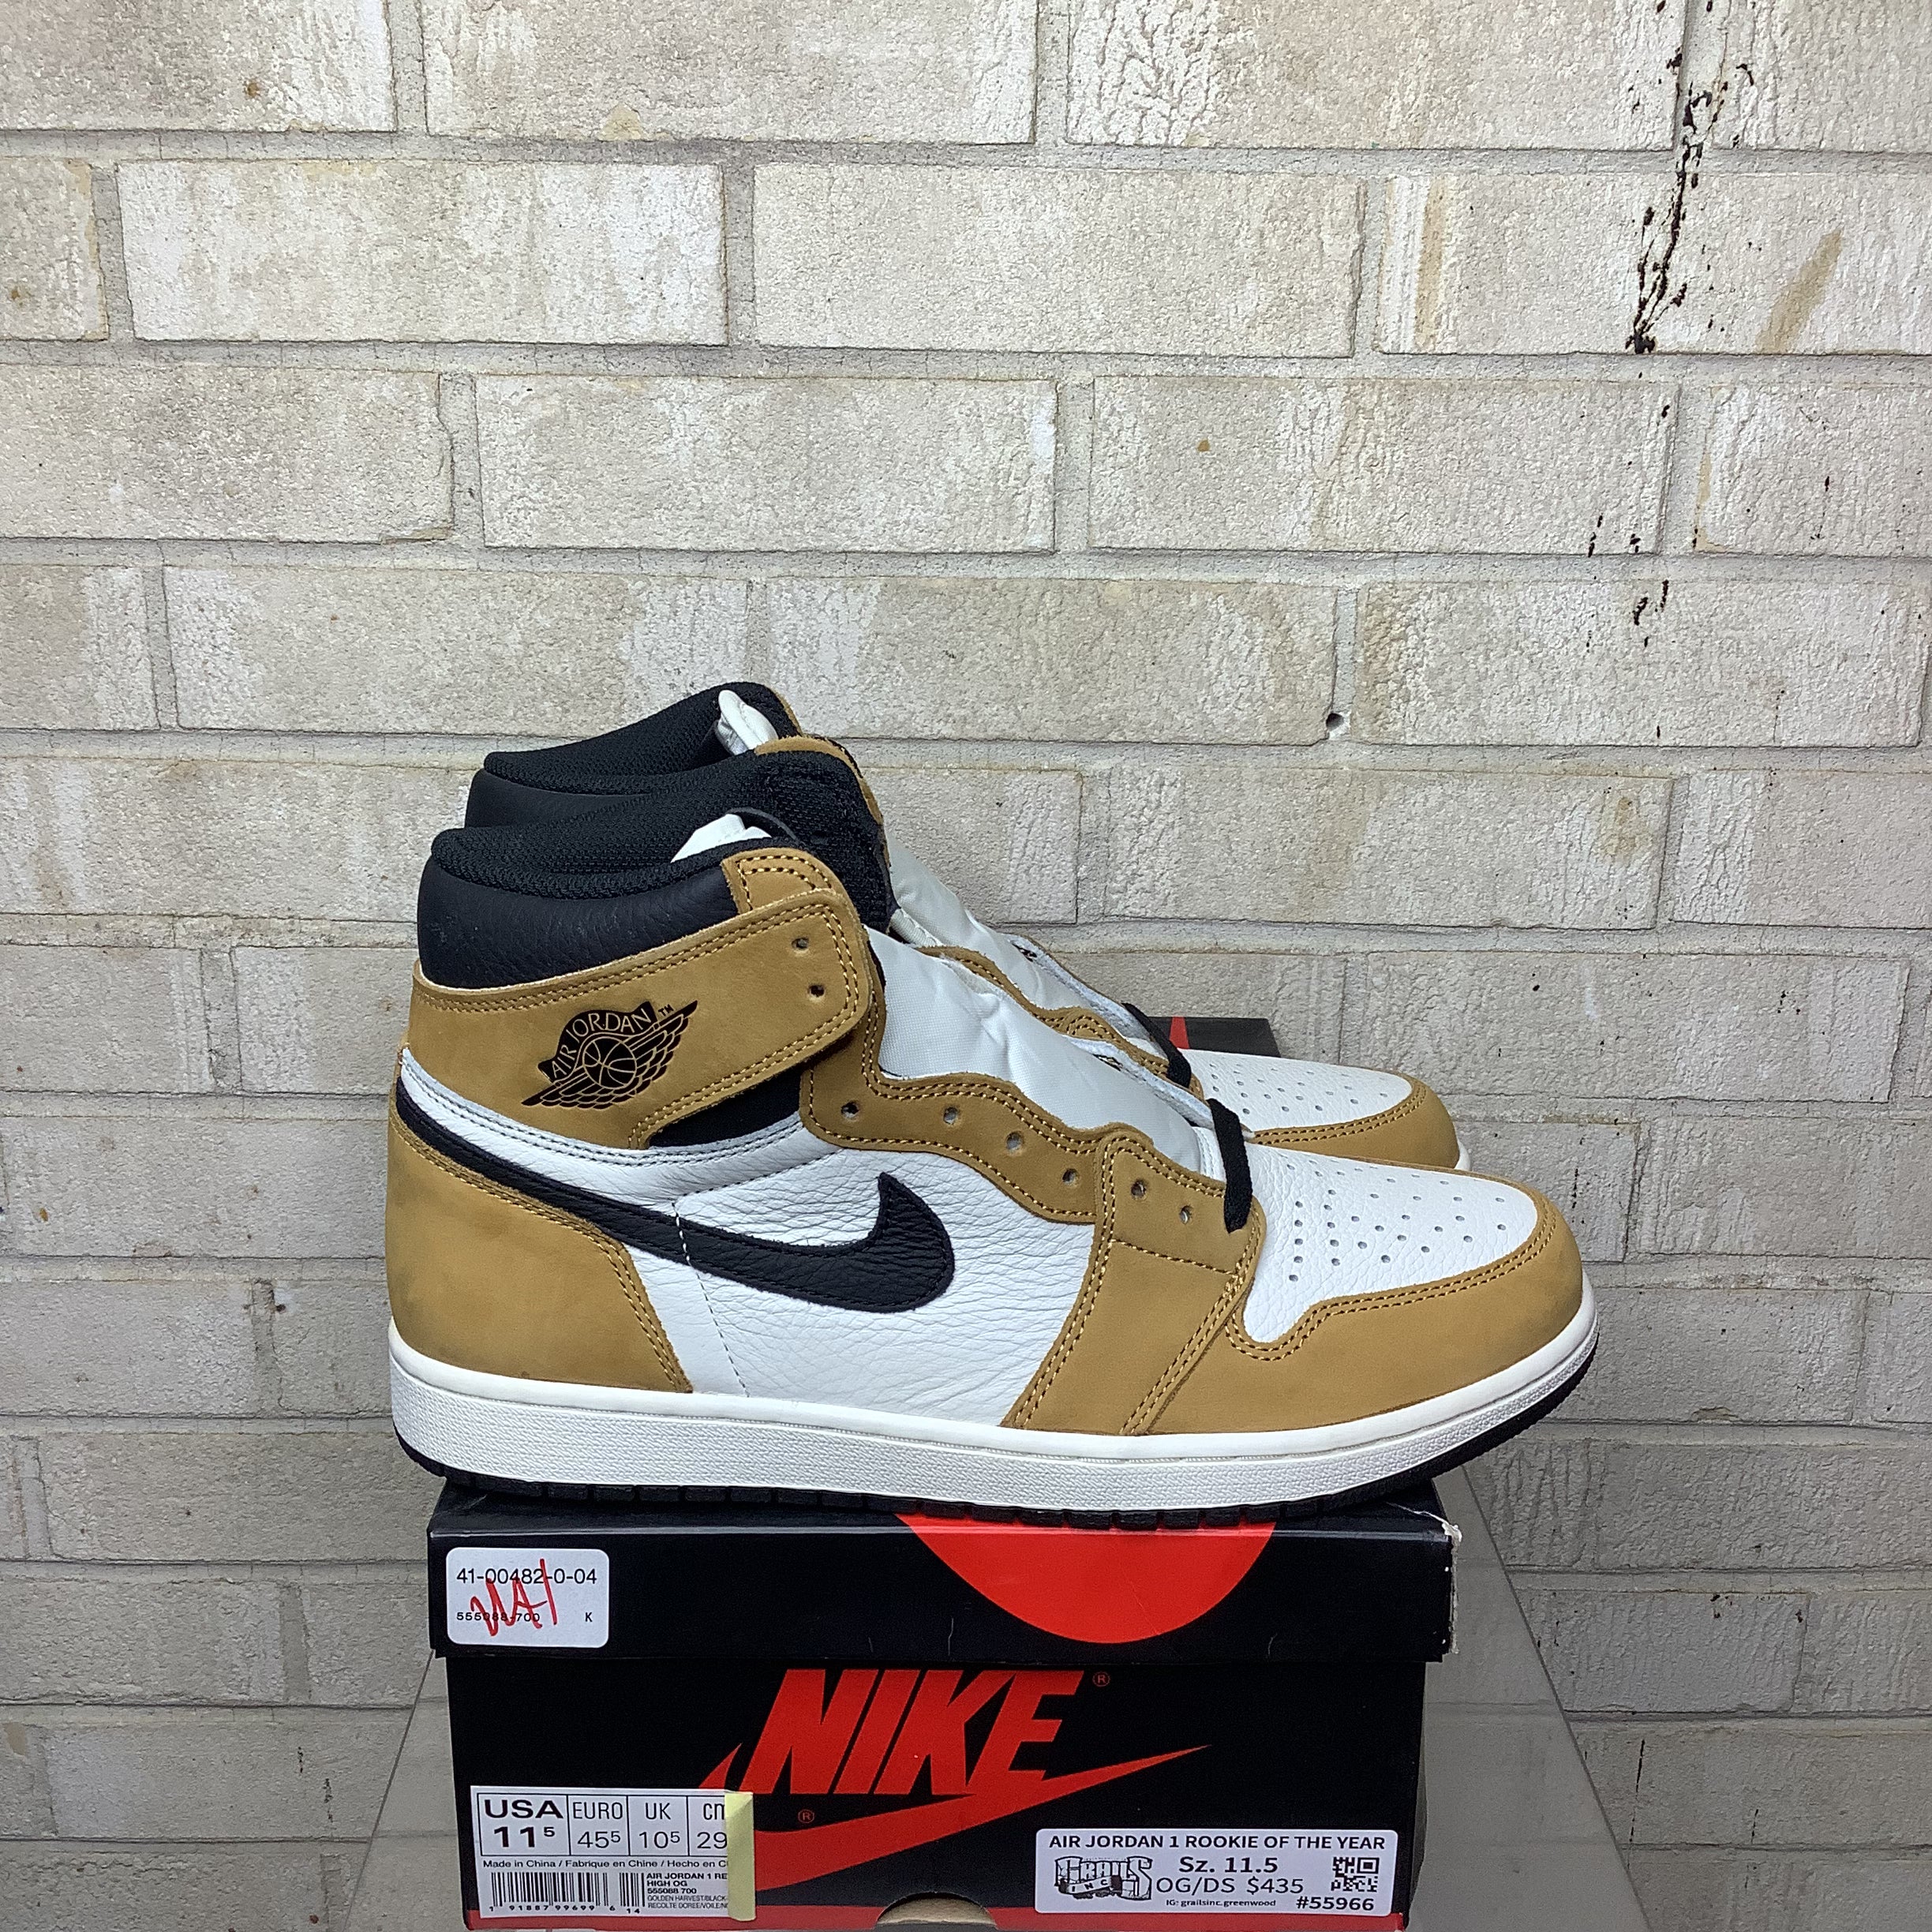 AIR JORDAN 1 ROOKIE OF THE YEAR SIZE 11.5 555088-700